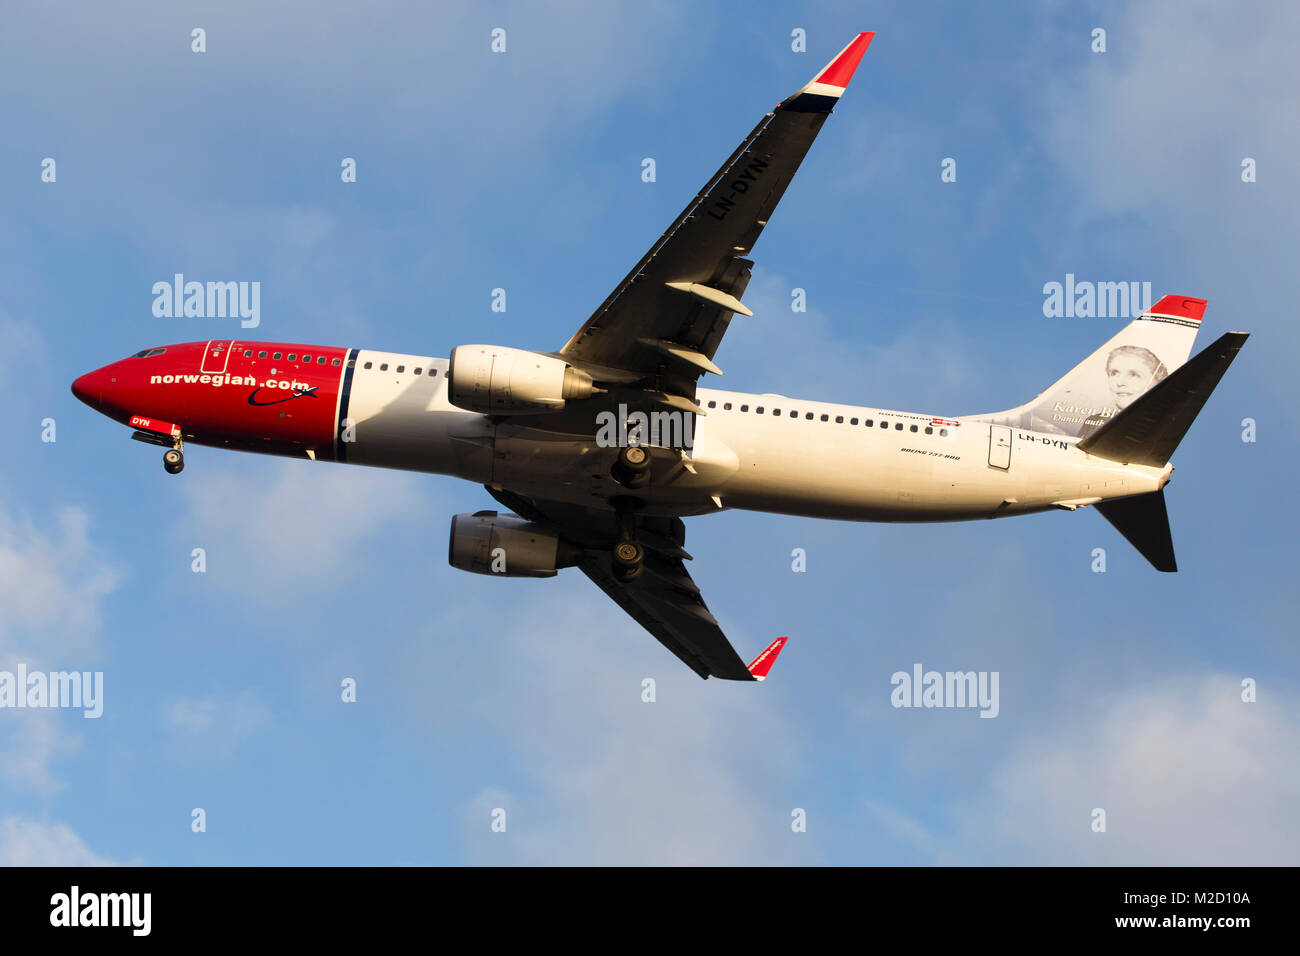 A Norweigan Air Shuttle Boeing 737-800 aircraft on final approach to London Gatwick airport on a January morning Stock Photo